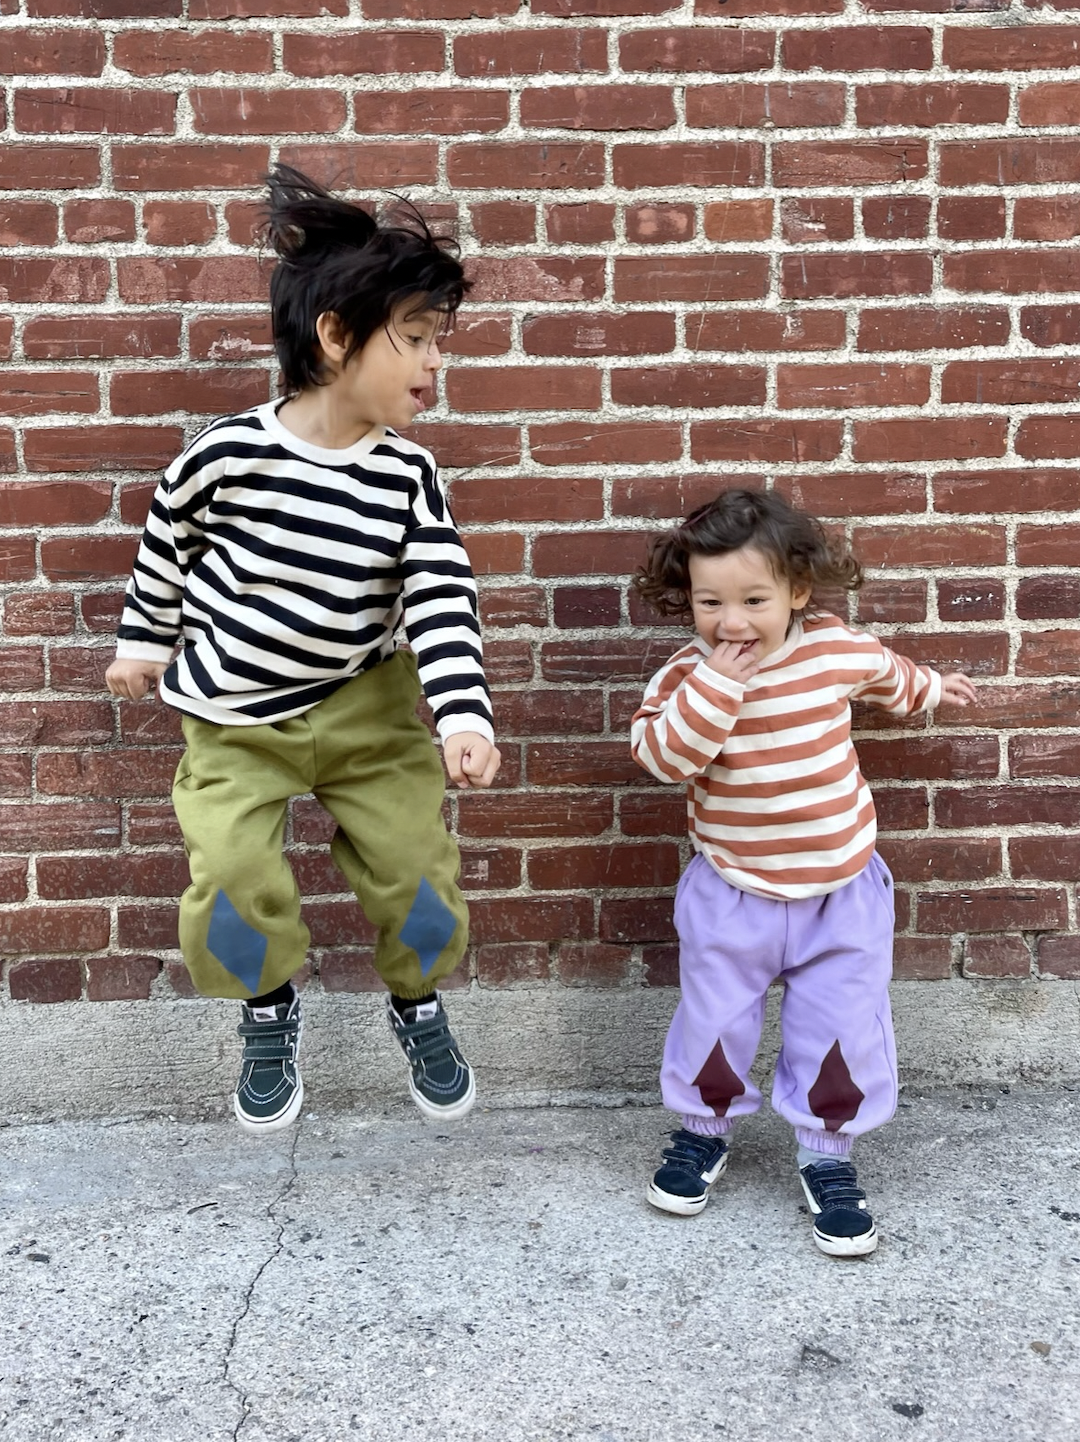 Two children jumping in the air, wearing kids' tee shirts, one black and white, the other peaches and cream